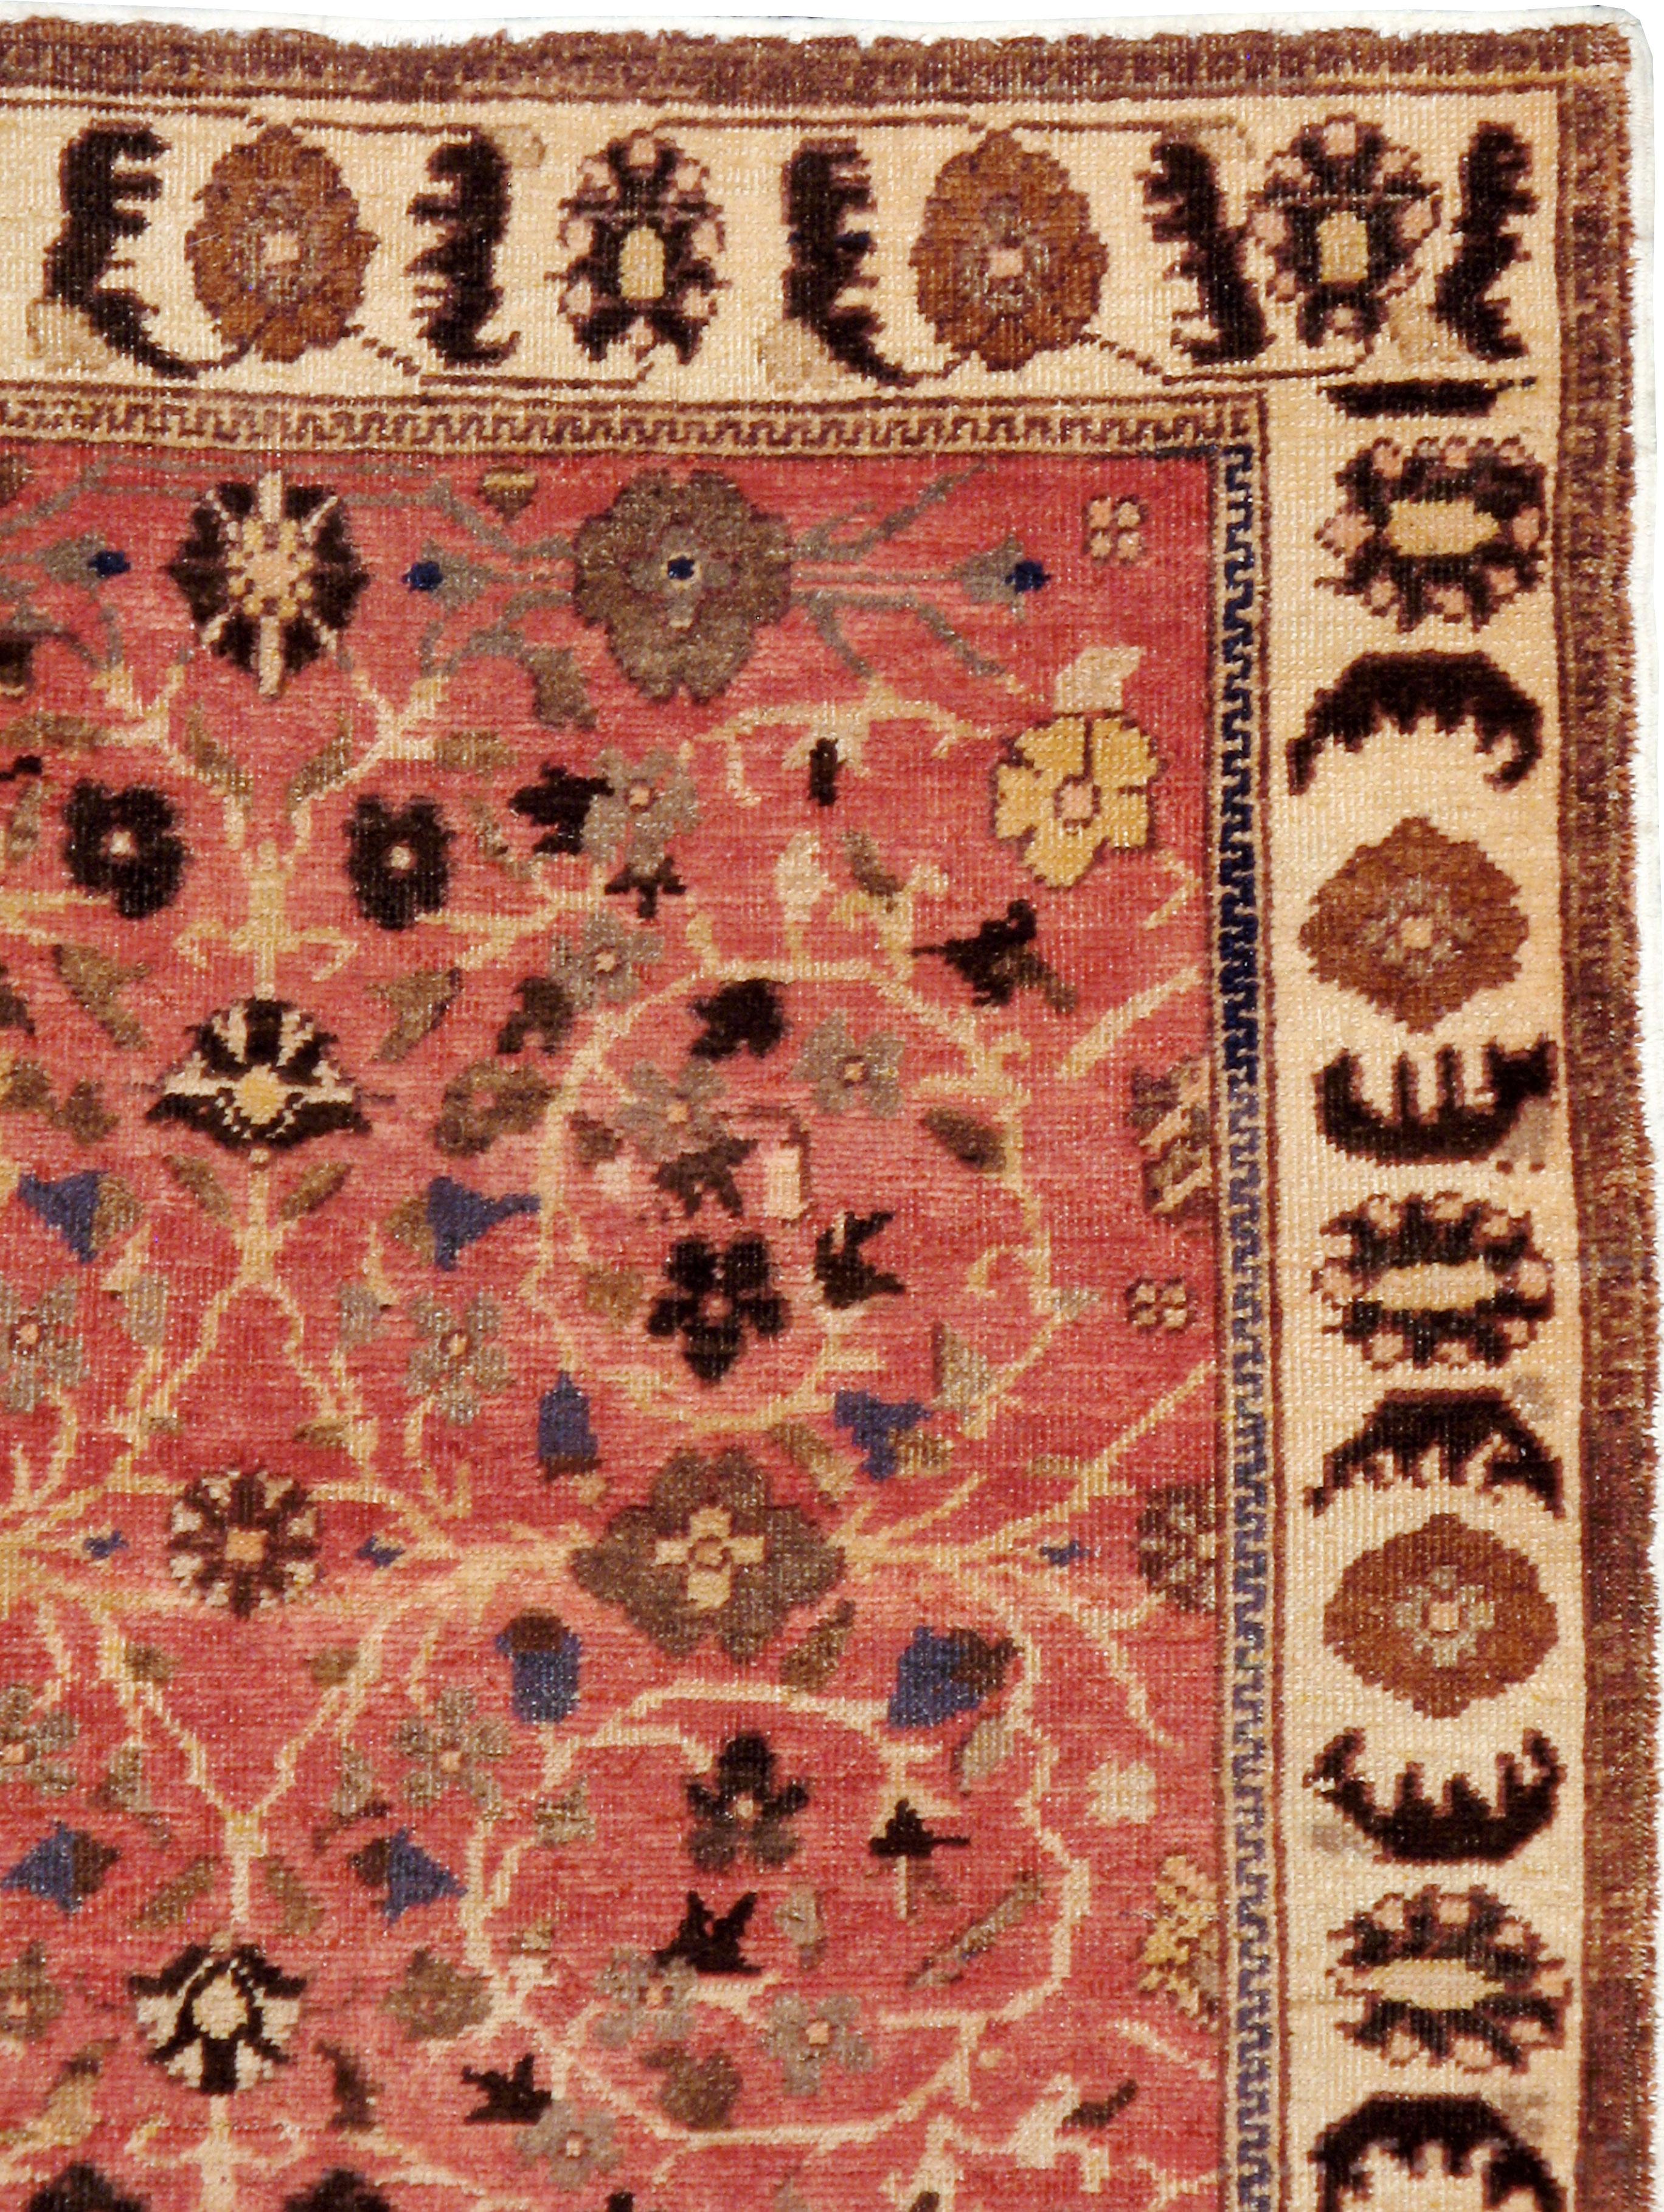 A vintage Turkish Anatolian rug from the mid-20th century. Spiraling foliate arabesques and concave lozenges decorate the dark coral field of this Persianate Turkish gallery rug. The sand border shows rosettes alternating with saz leaves.

Measures: